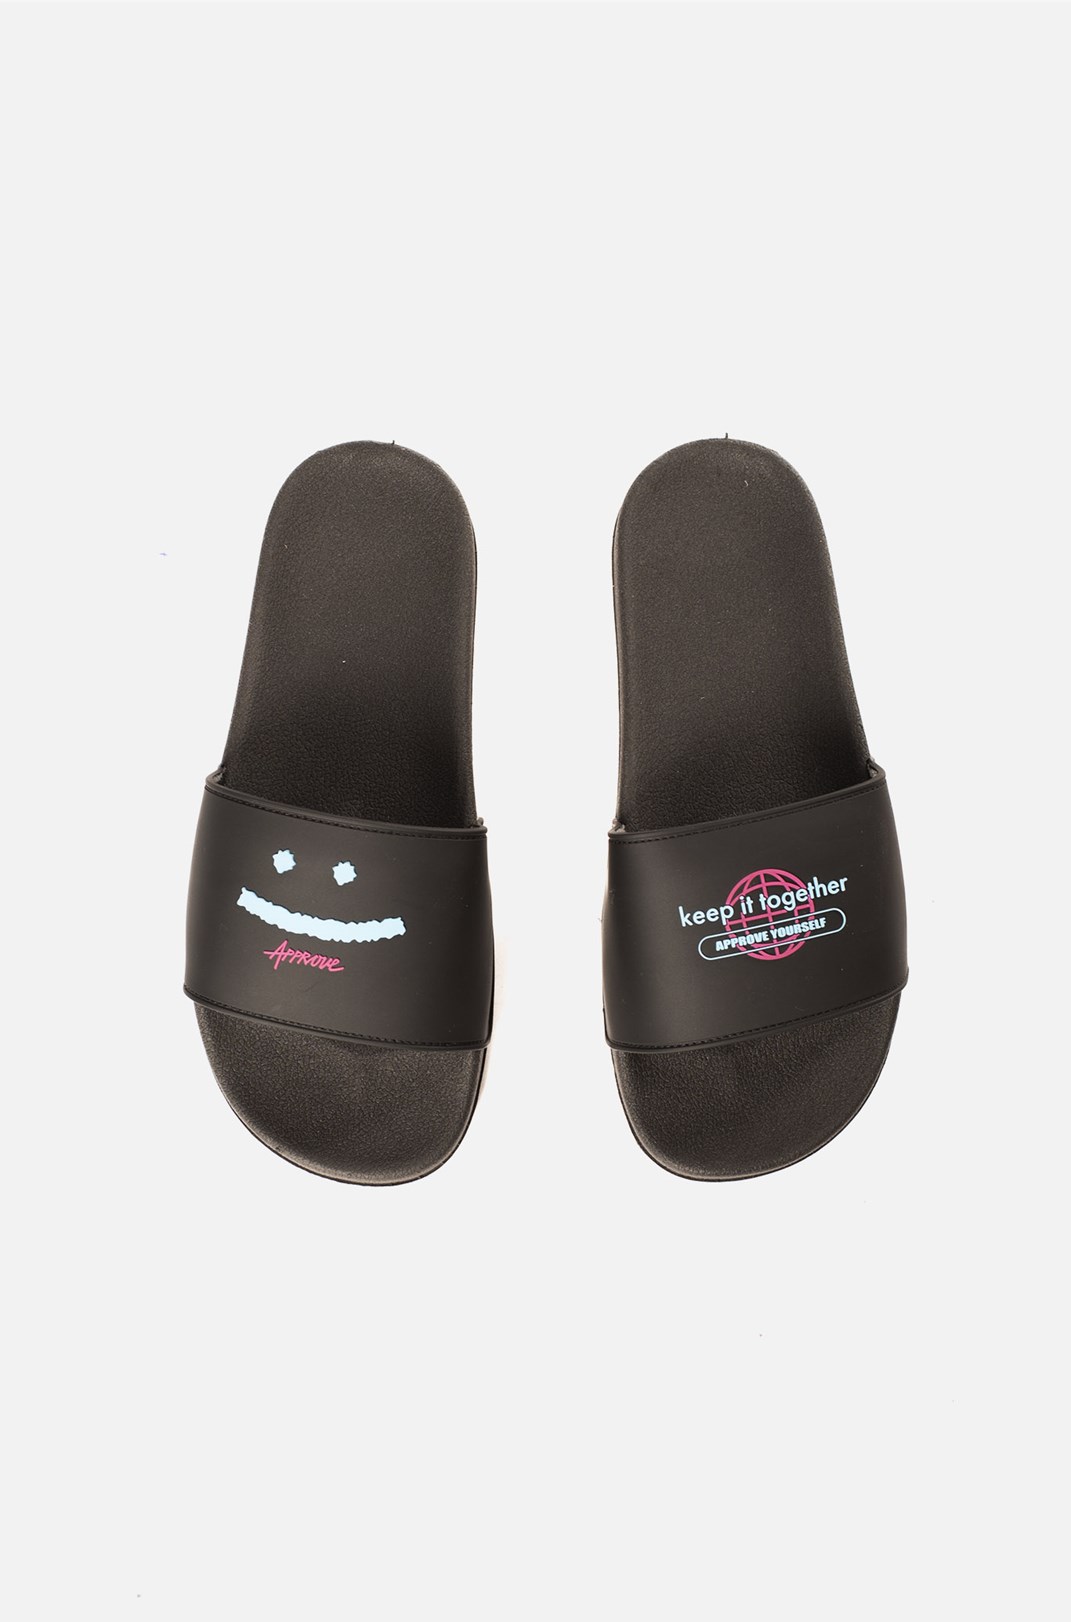 Chinelo Slide Approve Keep It Together Preto